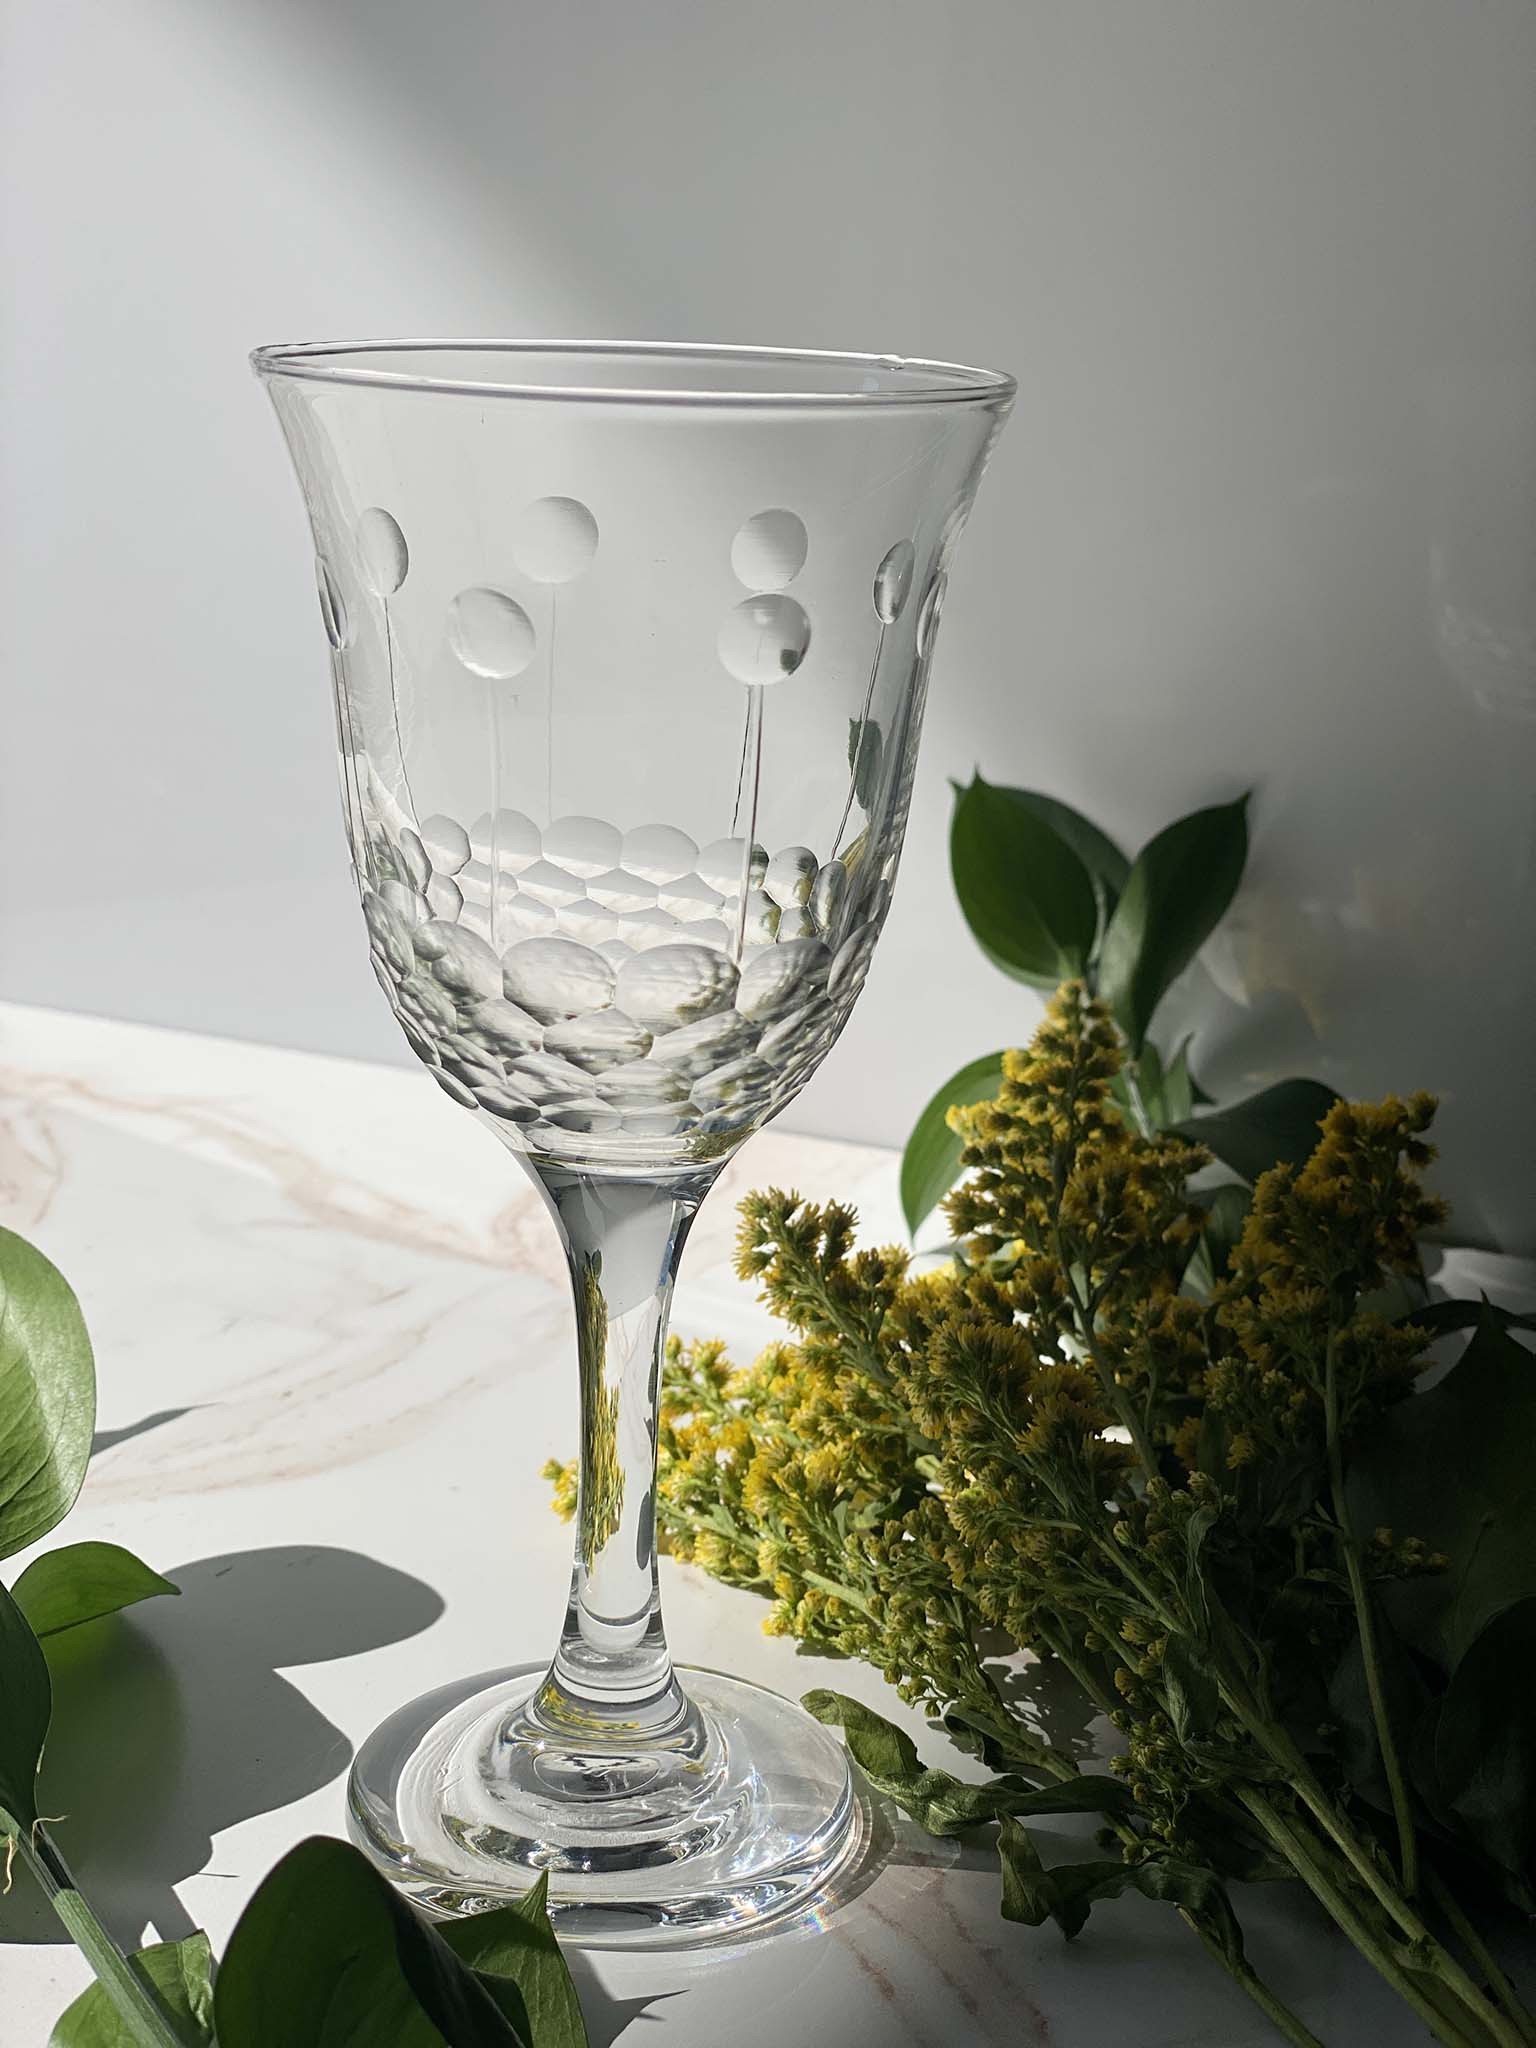 https://www.scentsandfeel.com/wp-content/uploads/2020/02/moroccan-set-of-wine-glasses-clear-with-bubble.jpg